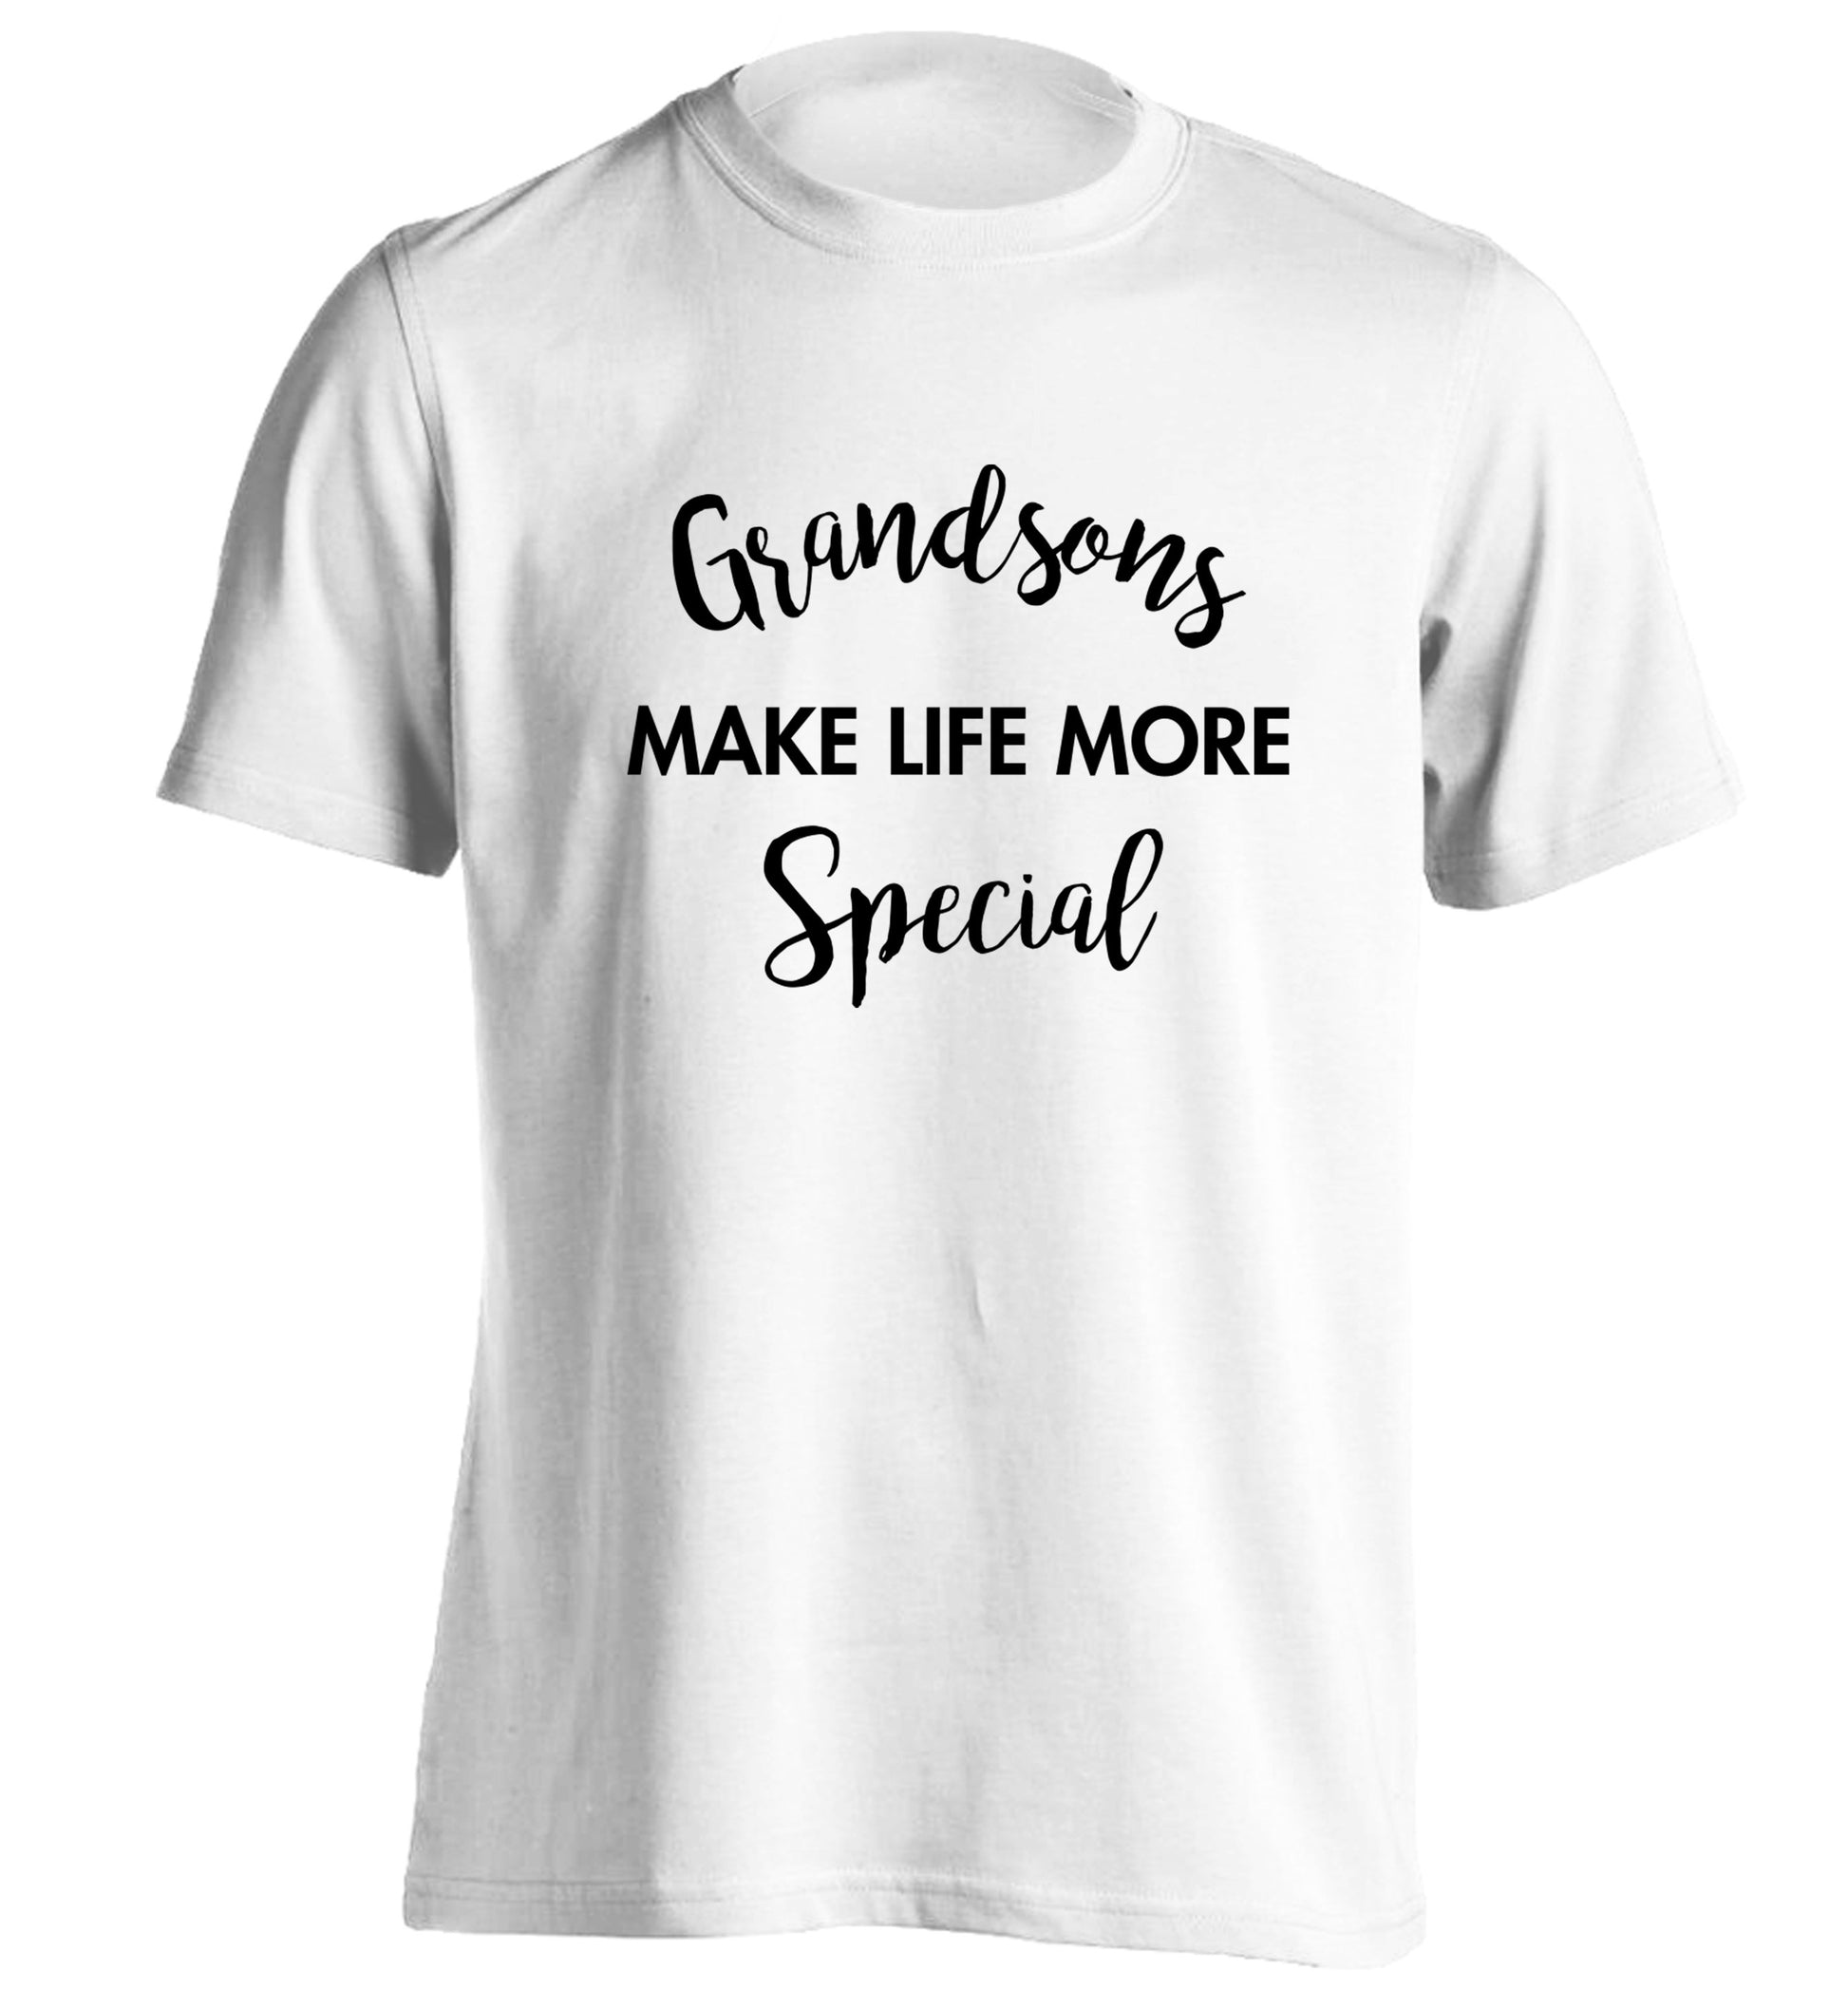 Grandsons make life more special adults unisex white Tshirt 2XL